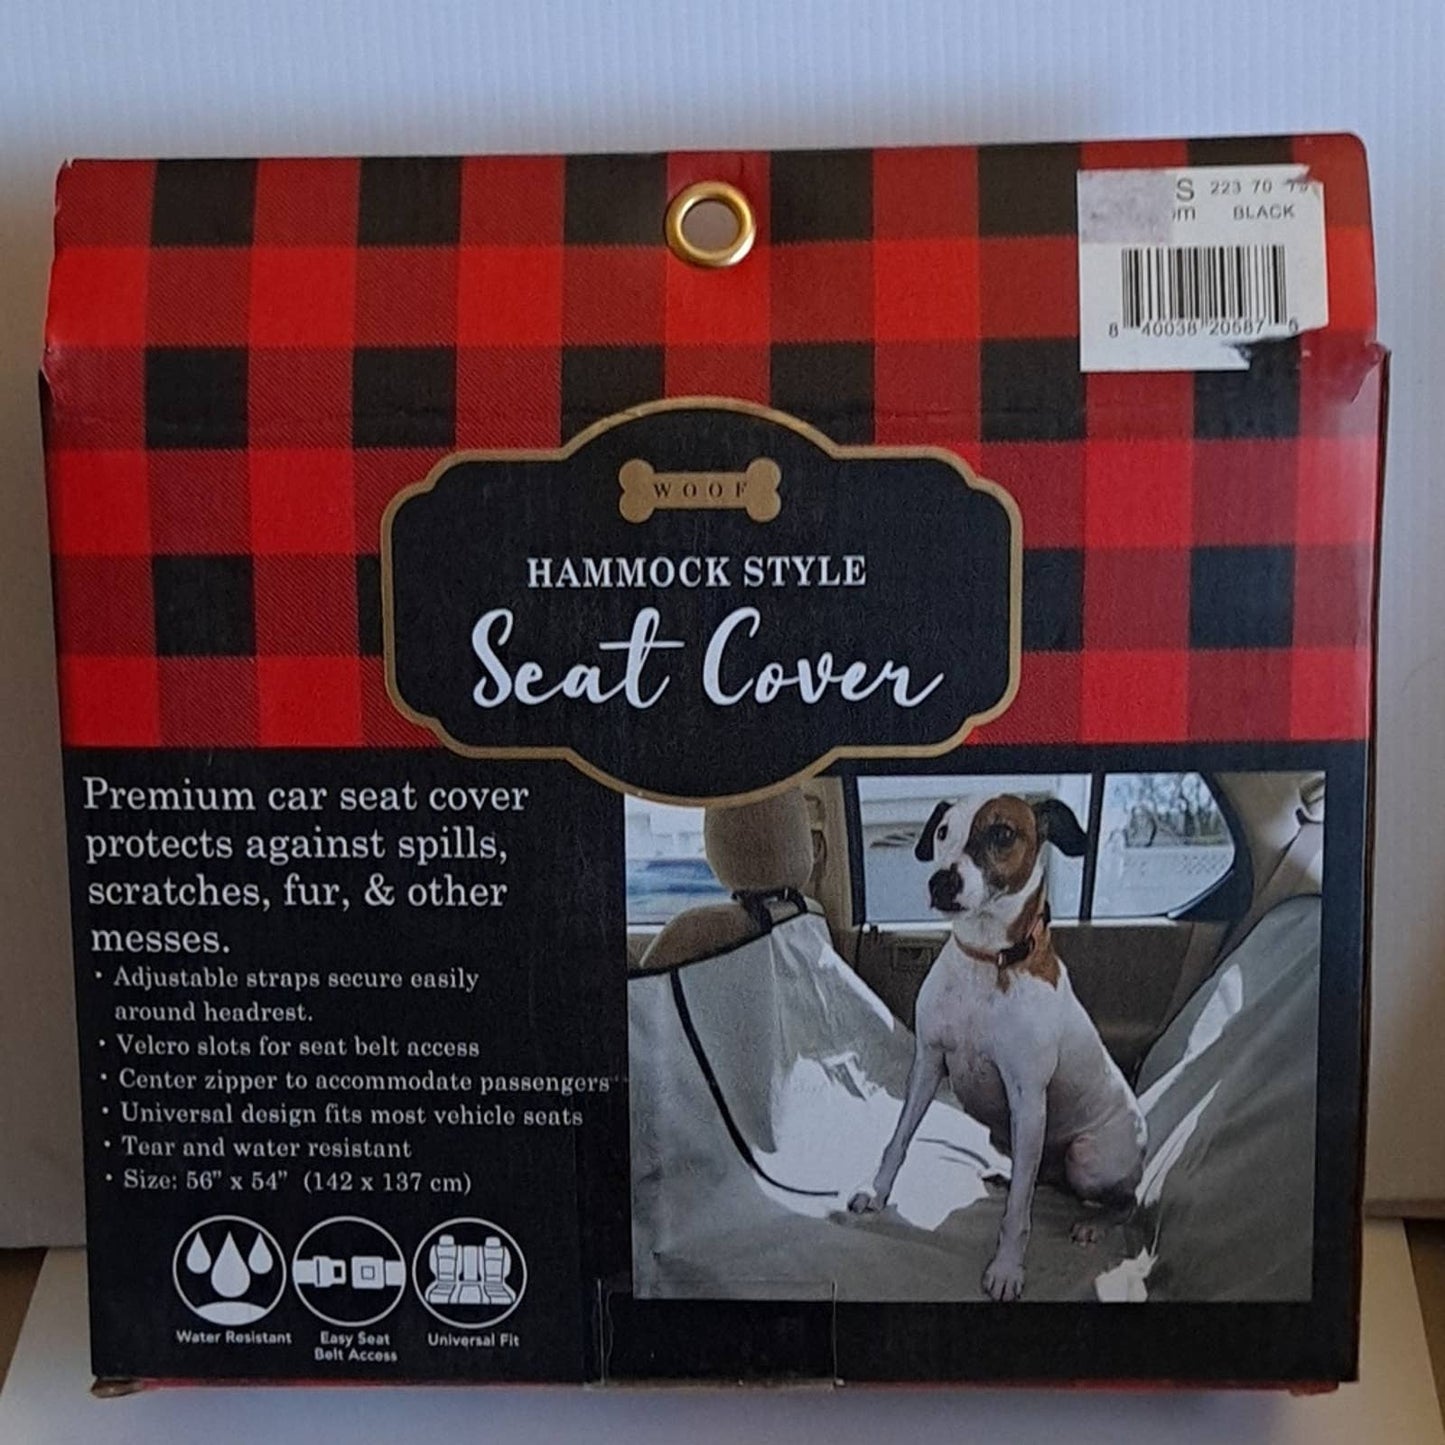 WOOF hammo k style doggie - pet seat cover NEW IN Box